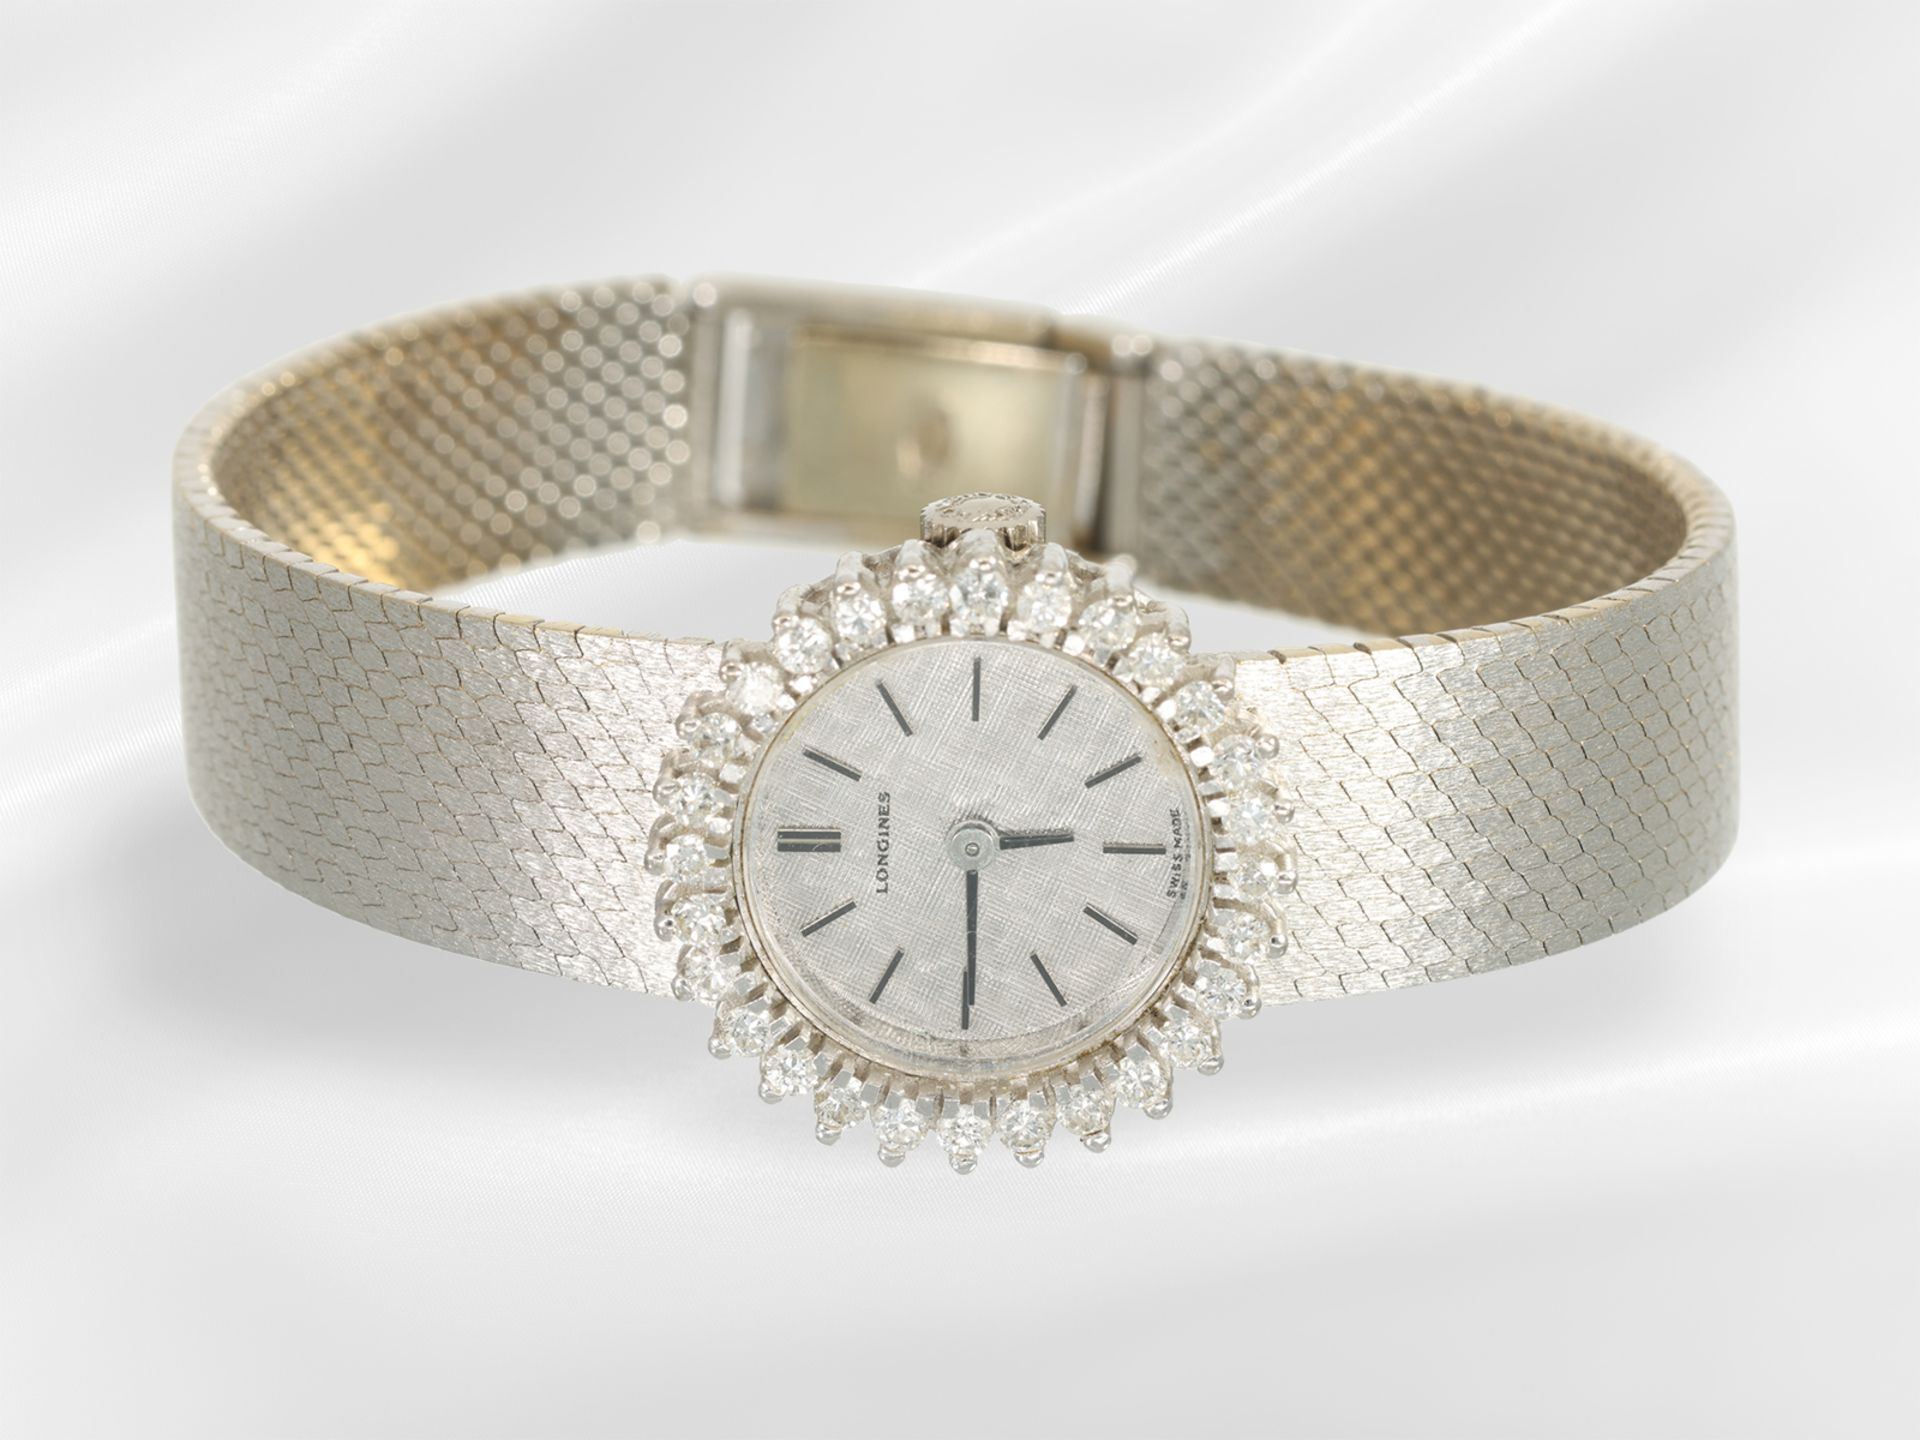 Wristwatch: white gold vintage ladies' watch by Longines with brilliant-cut diamond bezel - Image 3 of 4